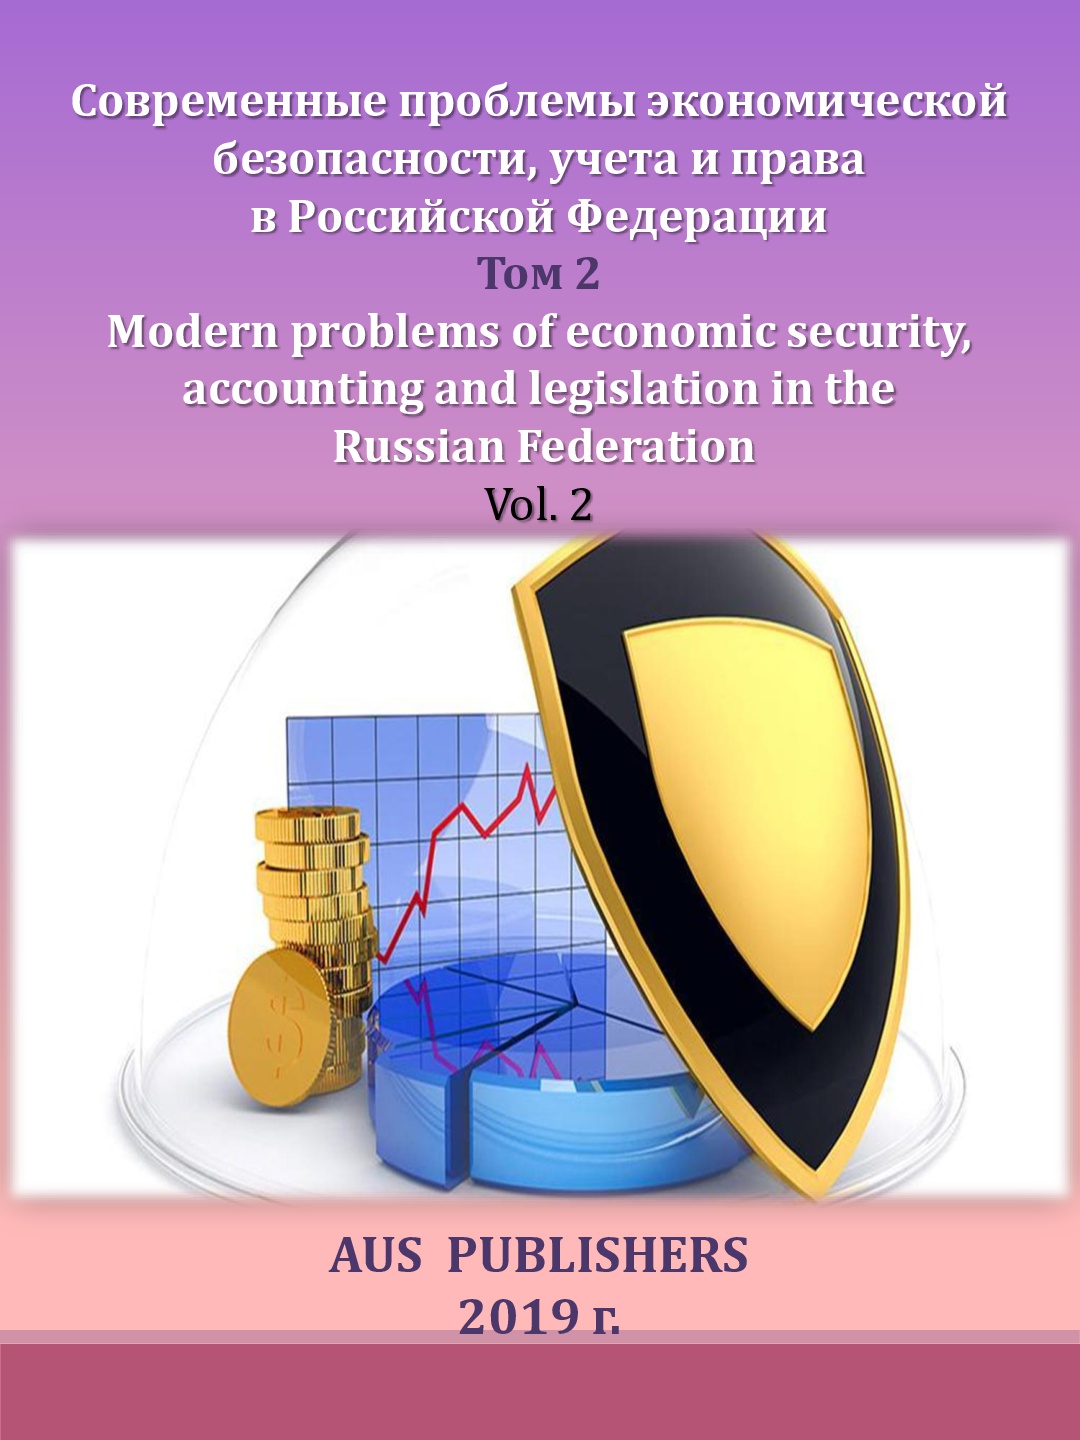                         FEATURES ANTI-INFLATIONARY POLICY OF THE RUSSIAN FEDERATION
            